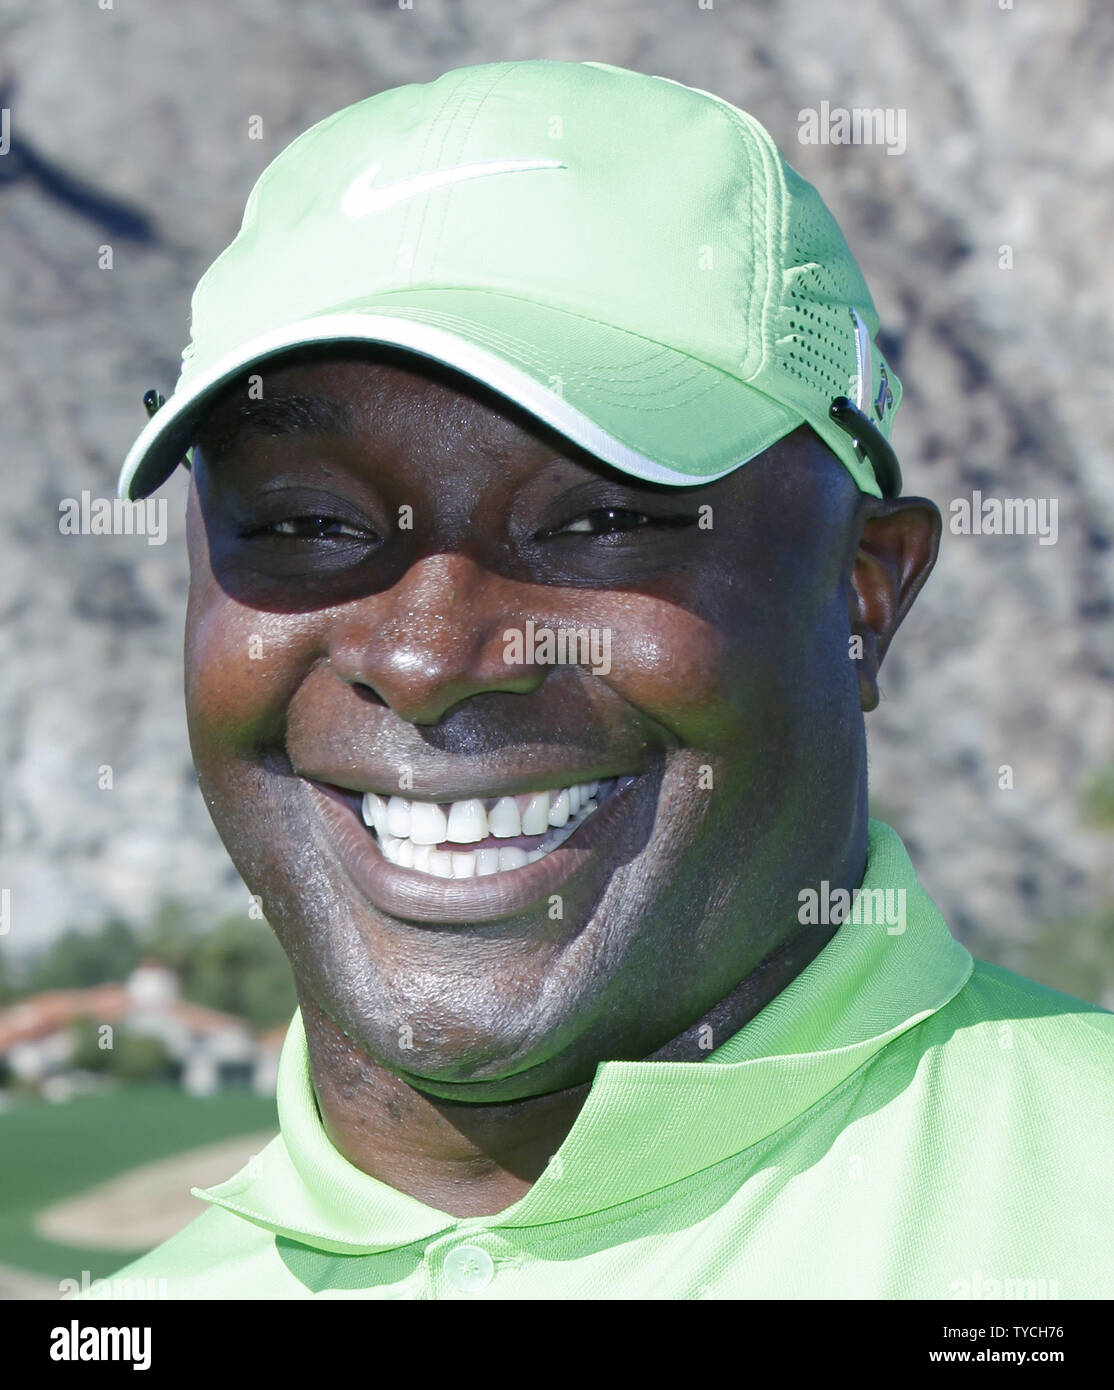 Former NFL wide receiver Sterling Sharpe arrives at the Bob Hope Classic at PGA West in La Quinta, California on January 23, 2010.  The tournament teams professional and amateur golfers with celebrities and has been raising money for a variety of charities since 1960.   (UPI/David Silpa) Stock Photo